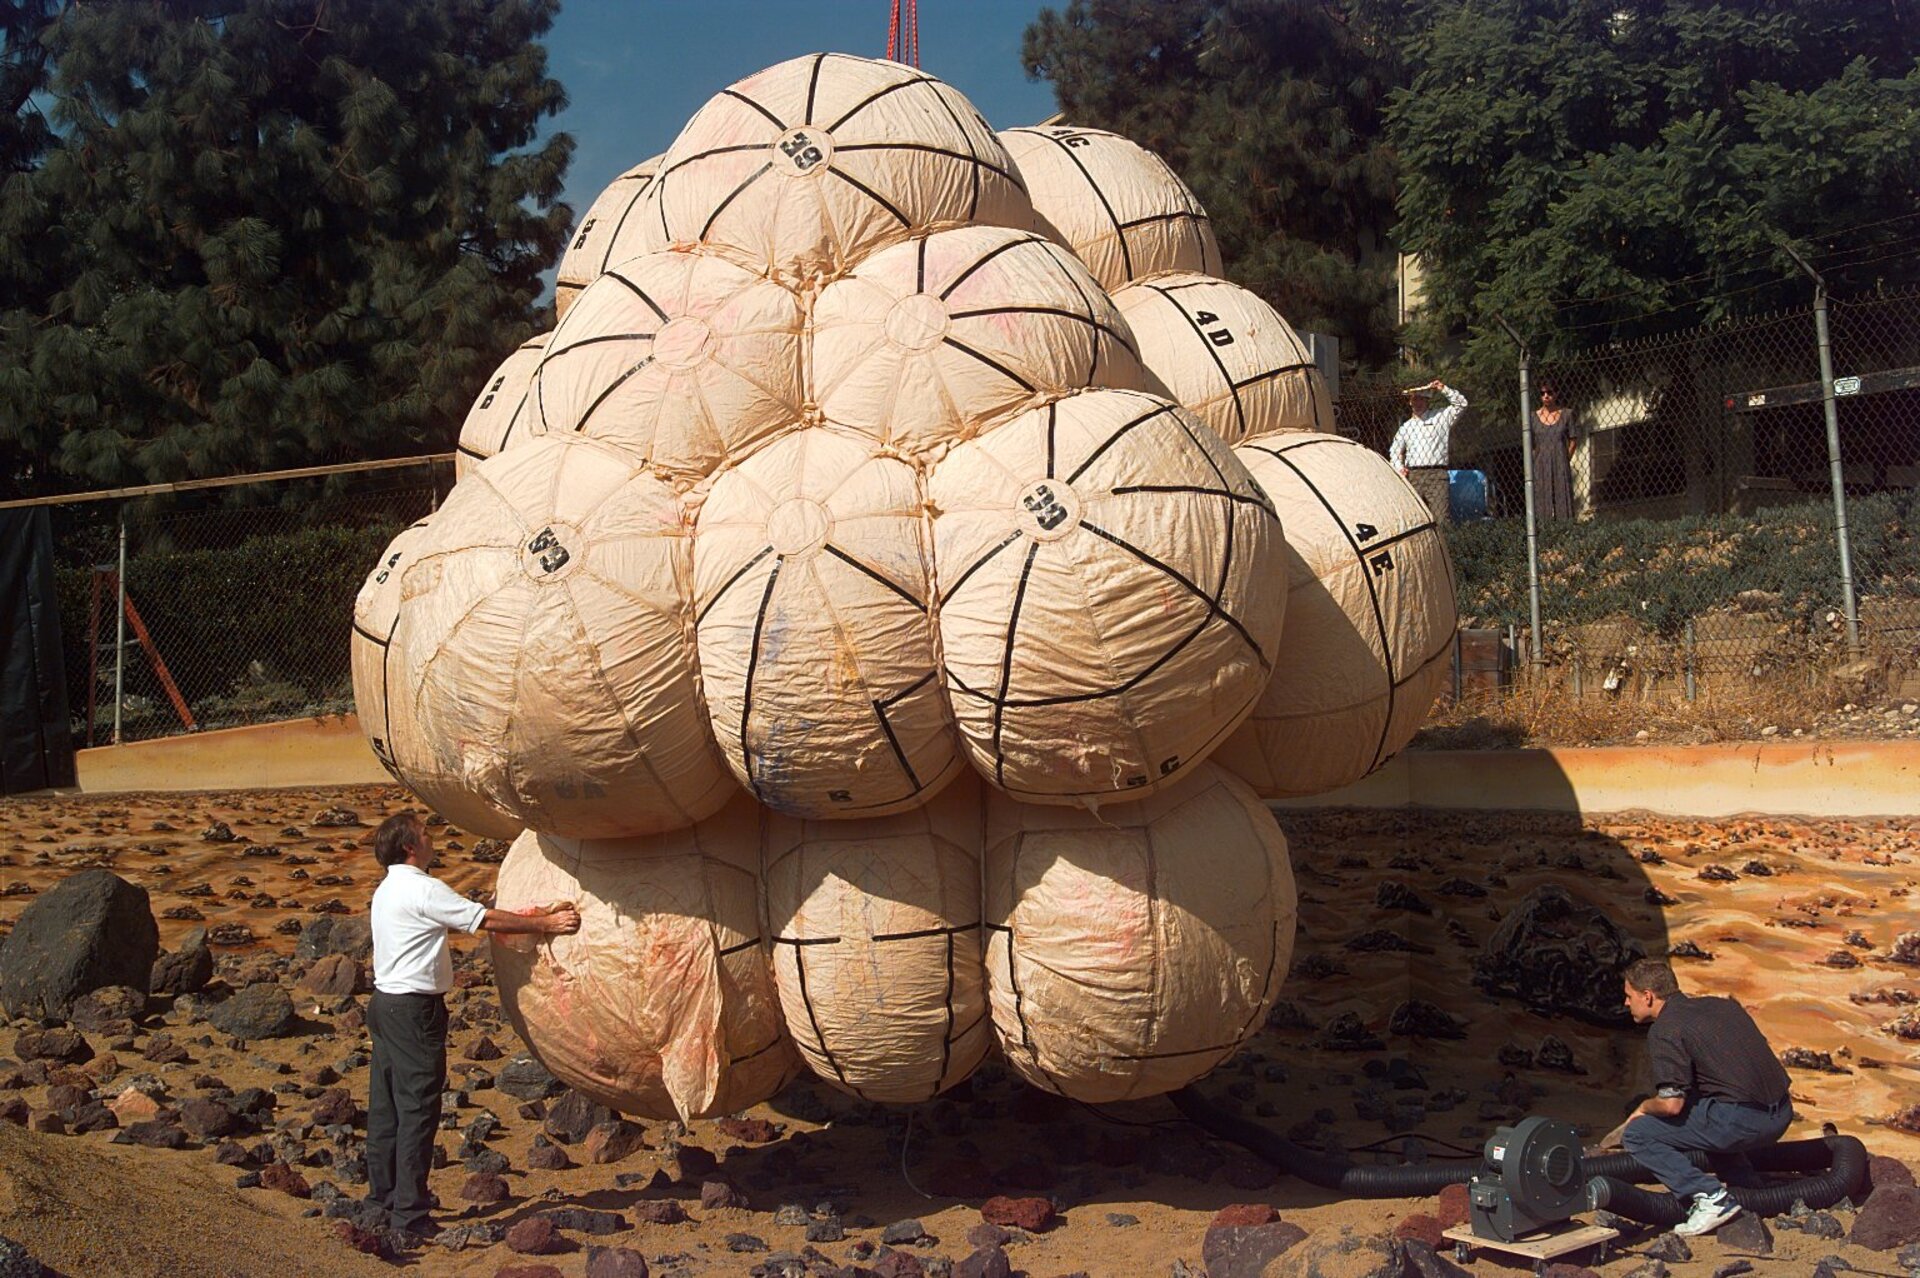 Air bags for the Mars Pathfinder mission